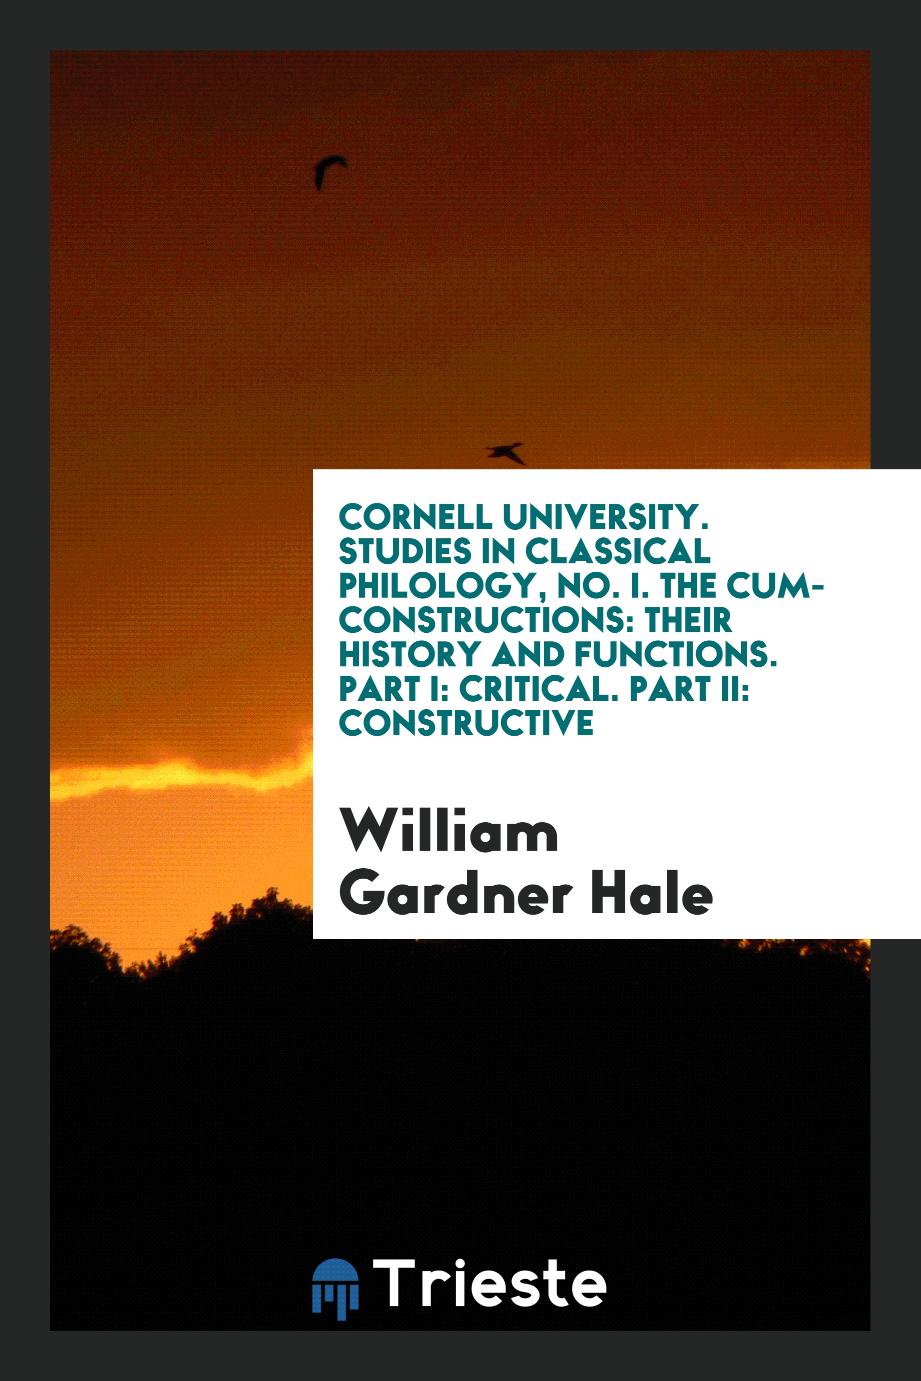 Cornell University. Studies in Classical Philology, No. I. The Cum-Constructions: Their History and Functions. Part I: Critical. Part II: Constructive